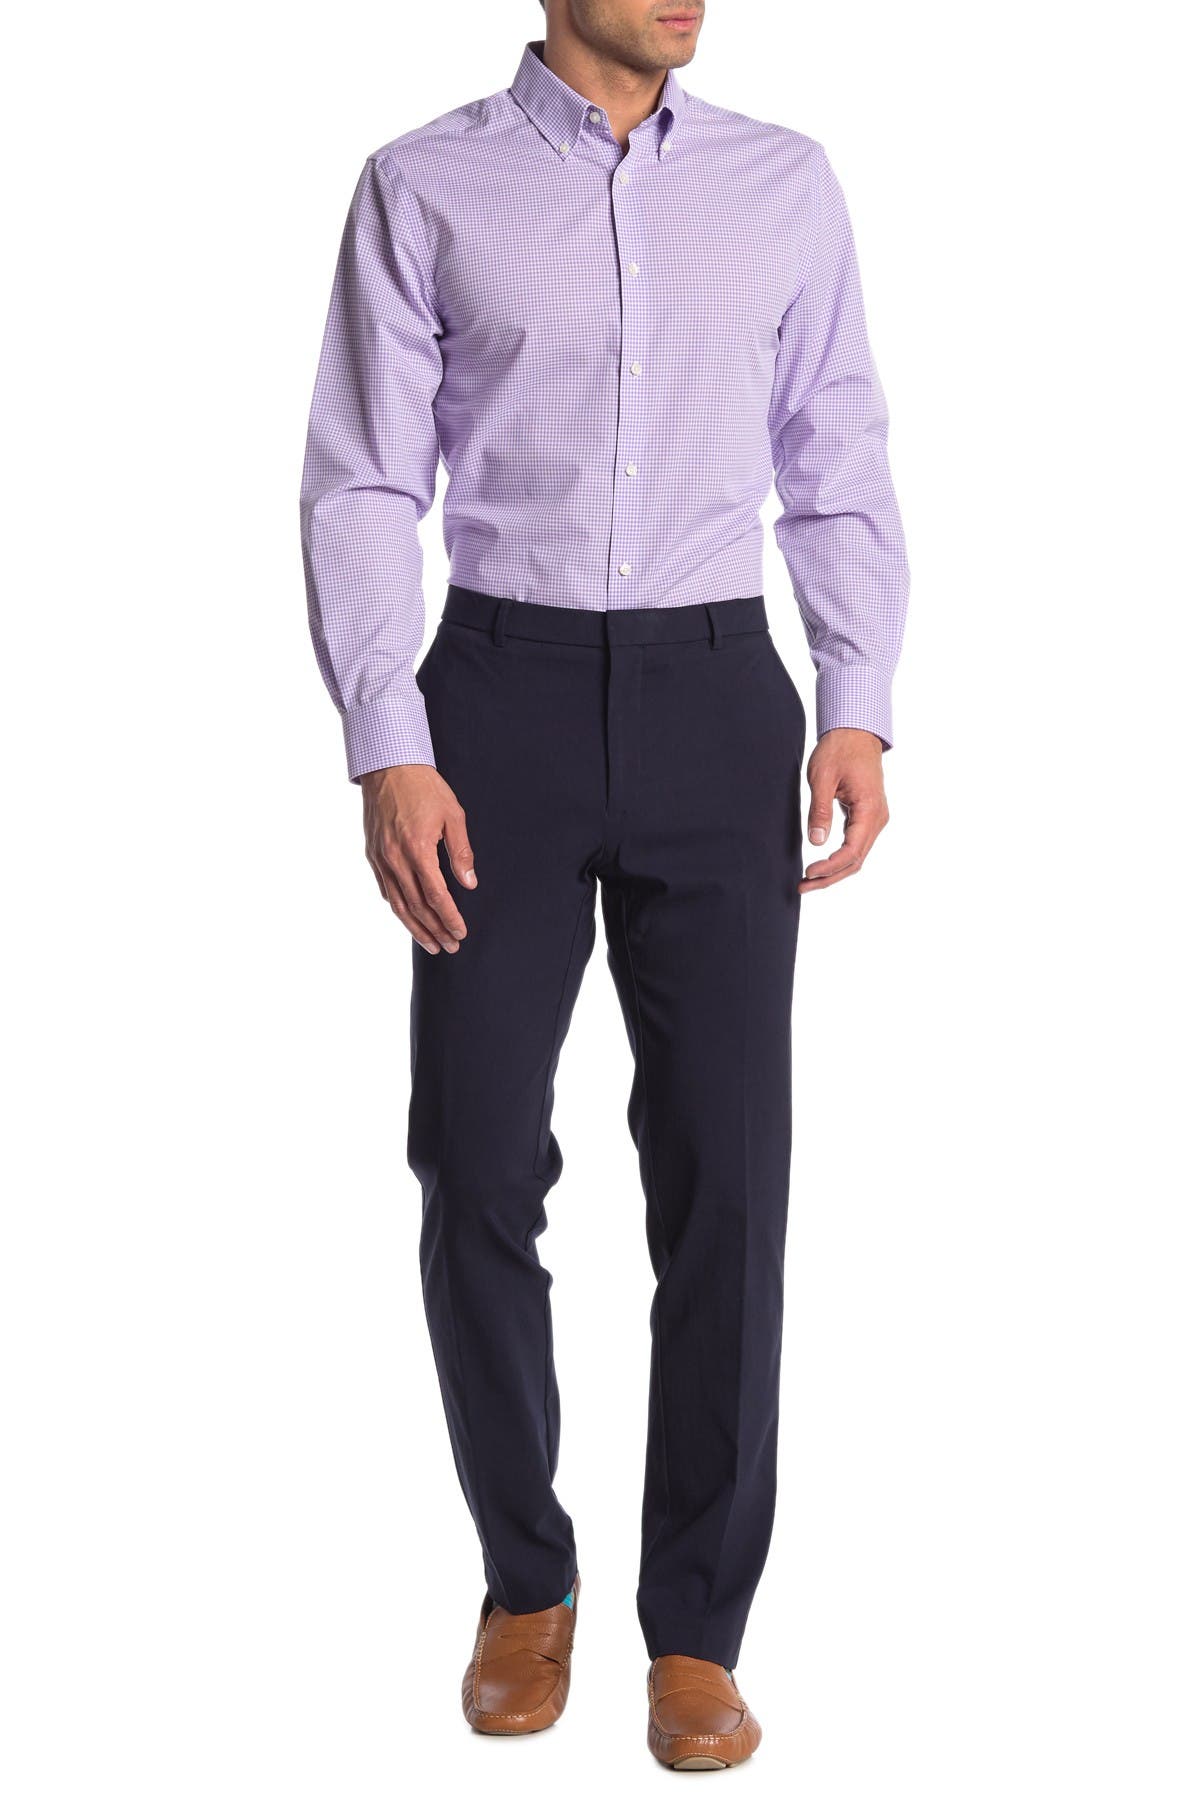 Tommy Hilfiger | Twill Tailored Suit Separate Pants | Nordstrom Rack